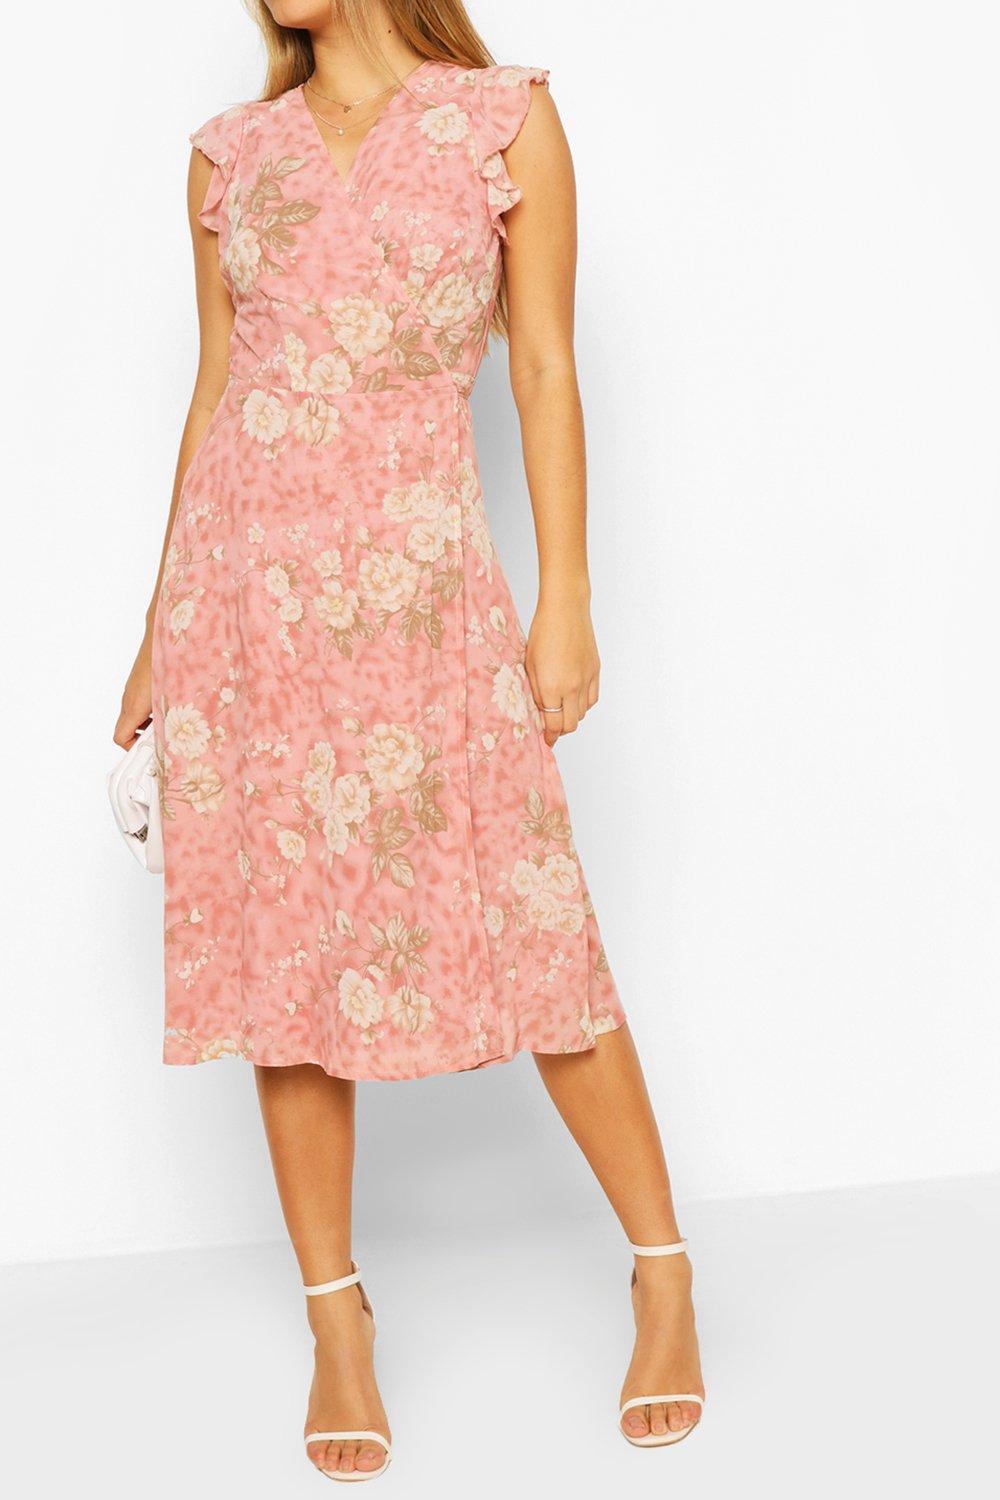 50-80% off Floral Ruffle Wrap Skater Dress